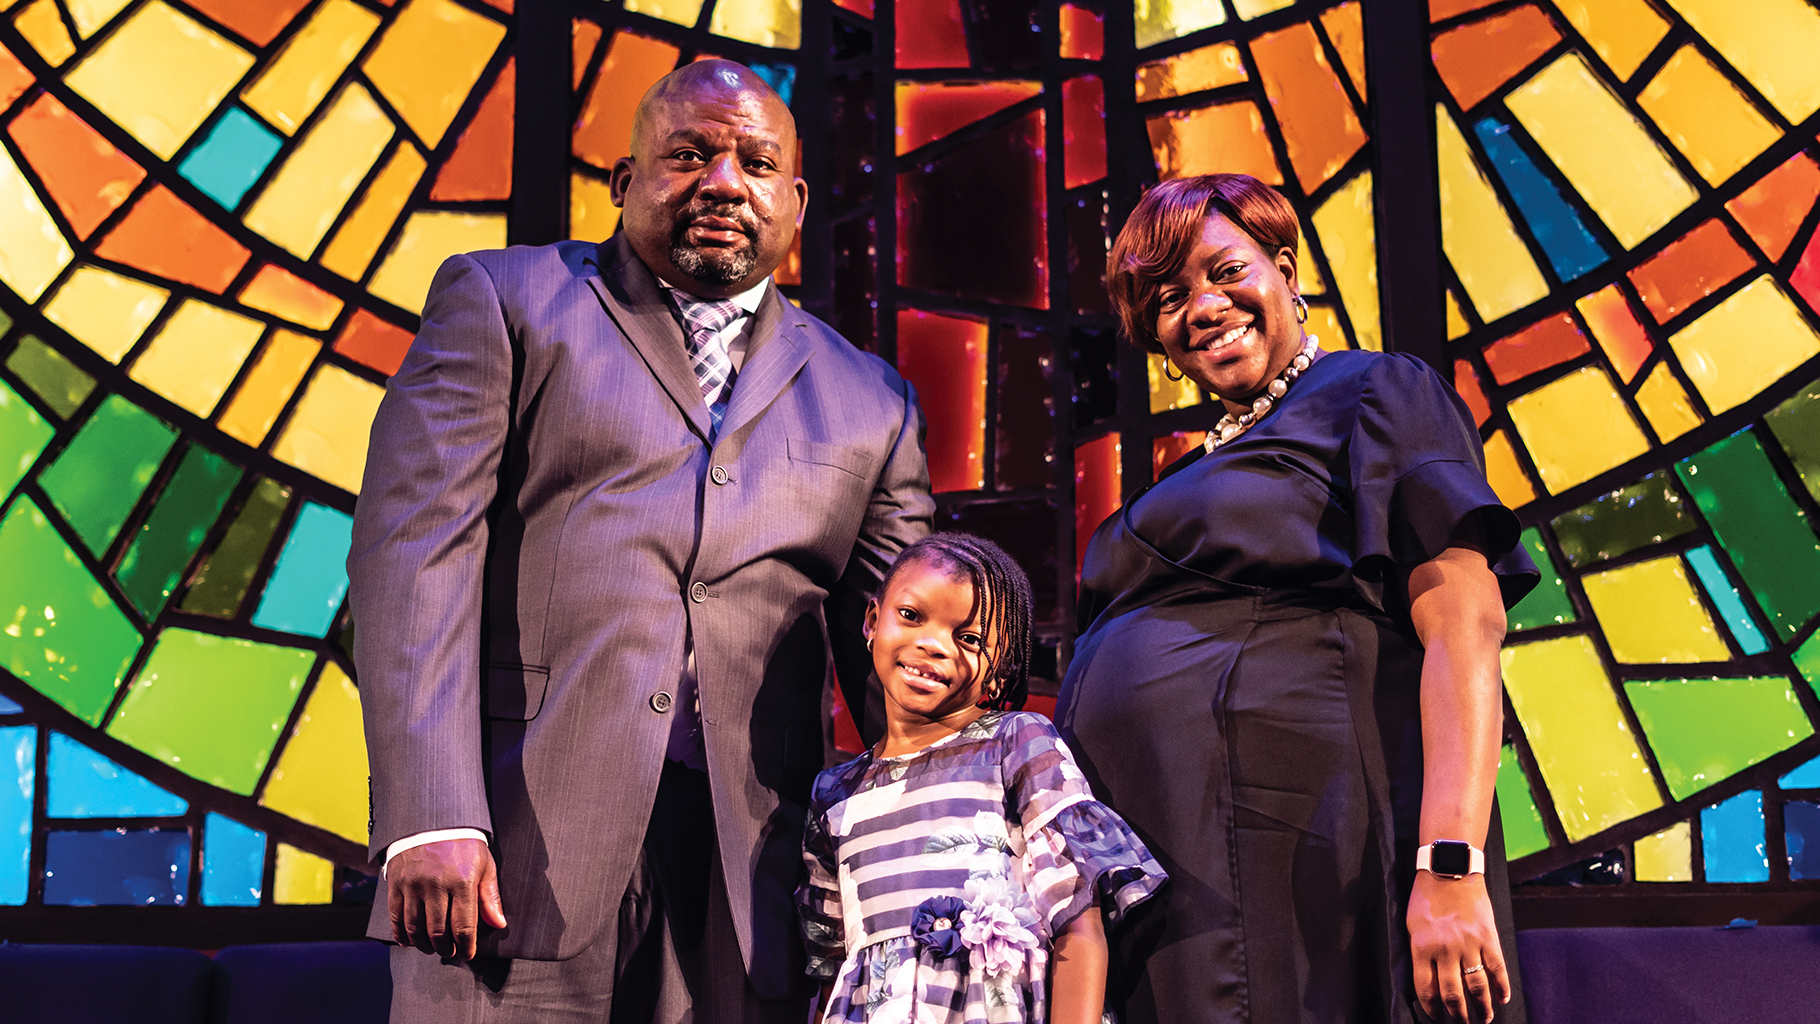 Modestine Davis stands before the church’s artful stained glass with her husband, Rev. George, and 6-year-old daughter, Isabella. “First Baptist Church of Highland Park just meets all of our spiritual needs and wraparound service needs in terms [of] family, children’s church, ministries that are strong,” Davis said.